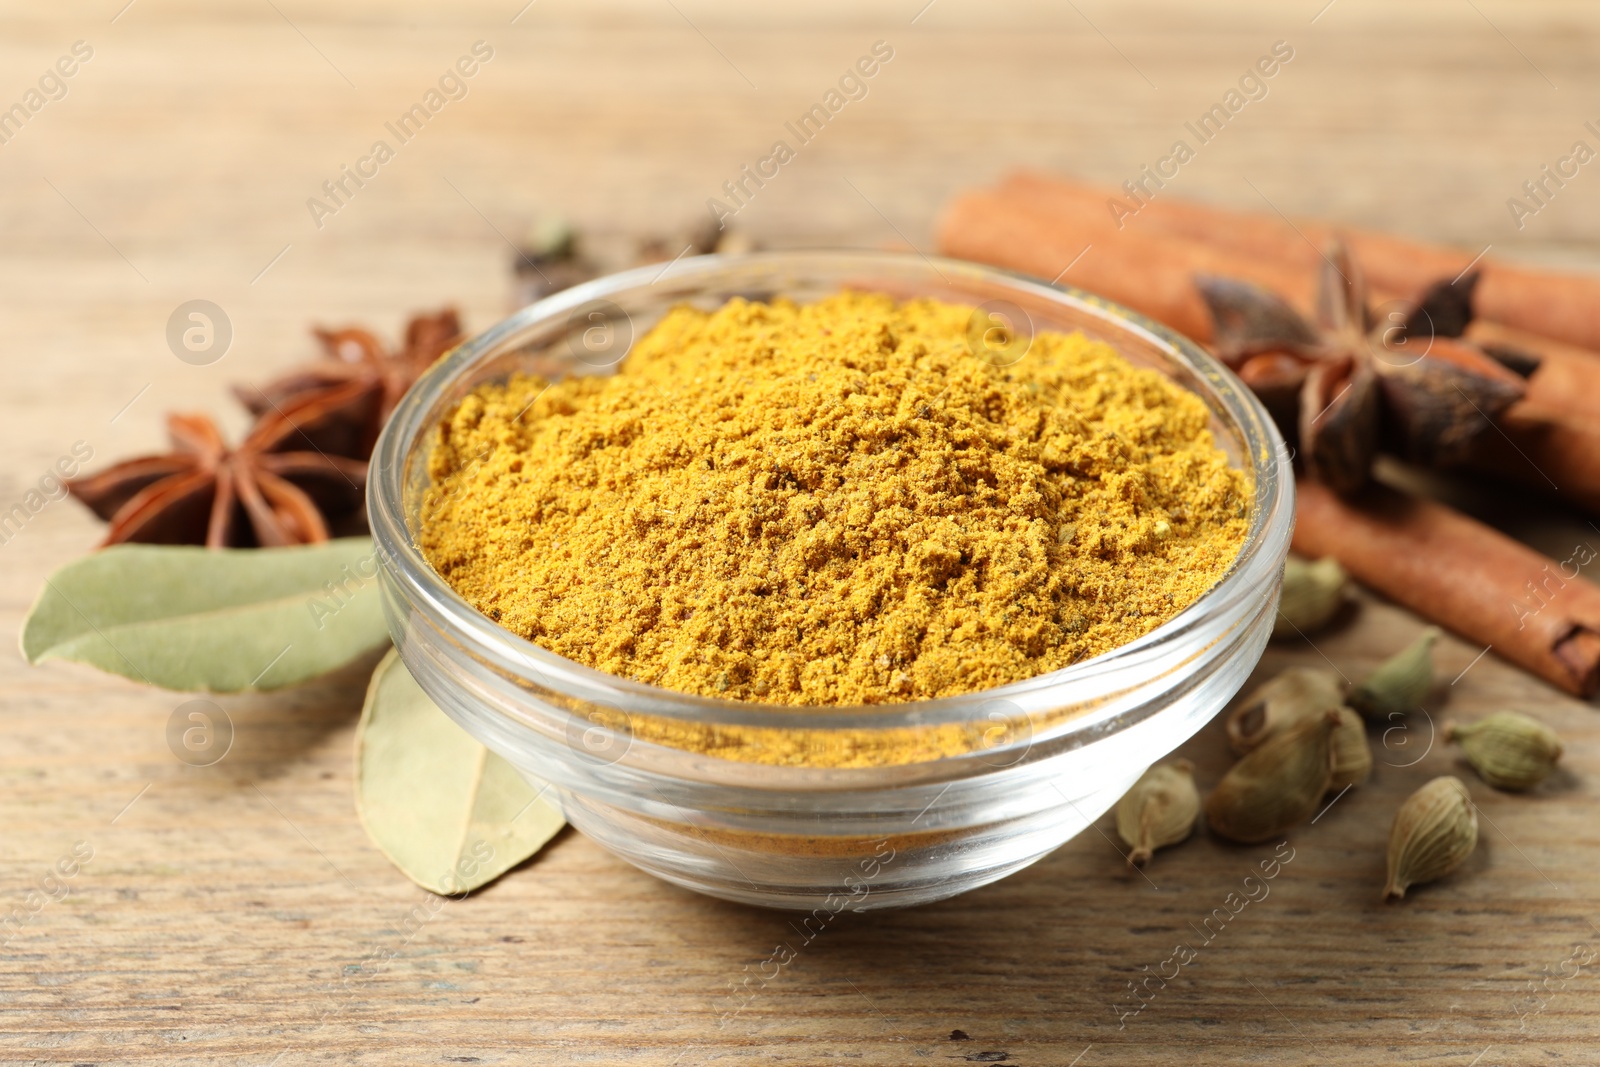 Photo of Curry powder in bowl and other spices on wooden table, closeup